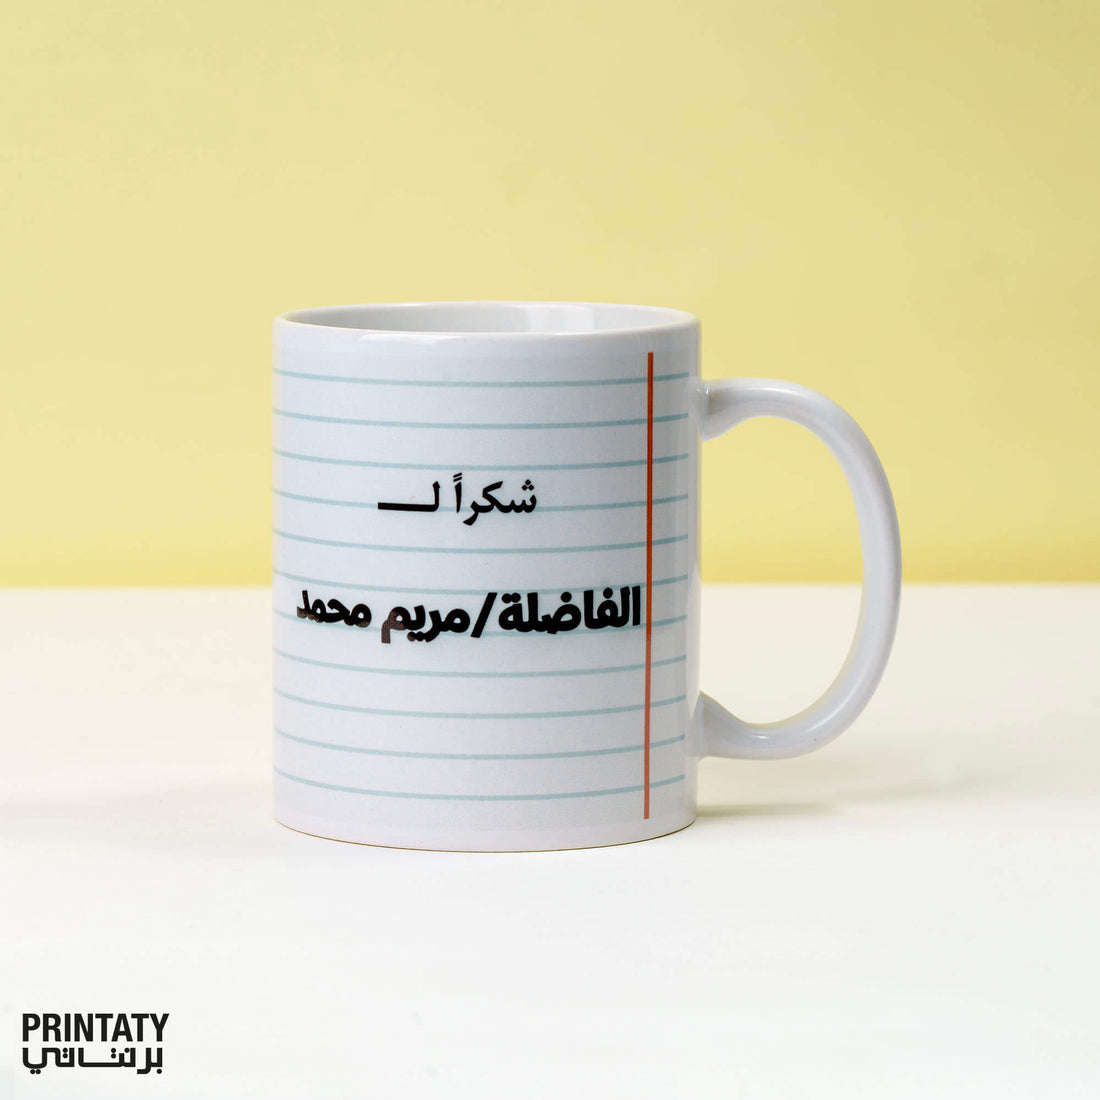 A Gift For The Teacher: A Mug In The Teacher’s Name With A Gift Card